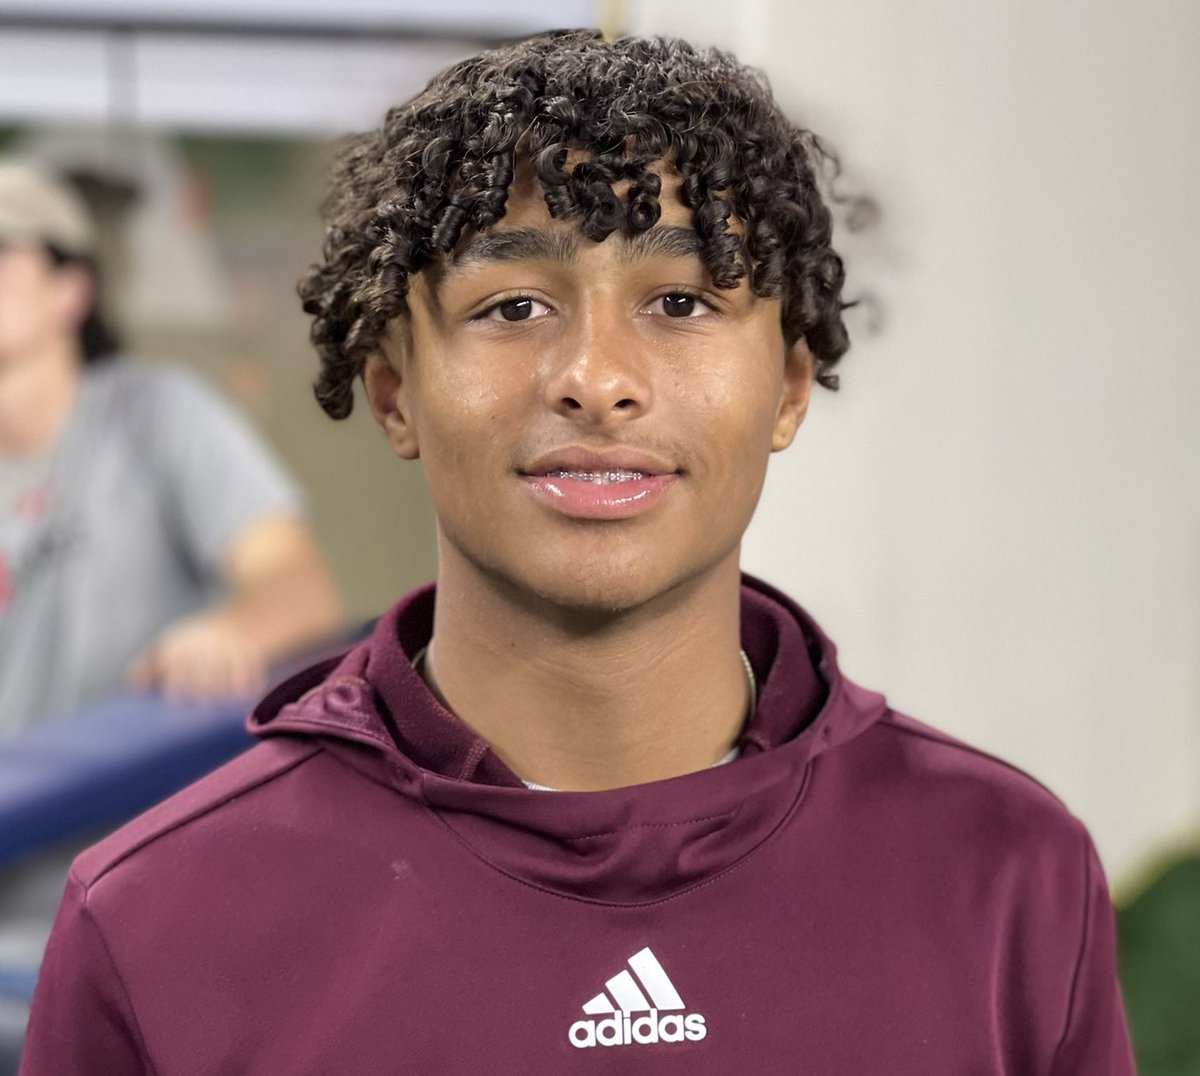 With @Official_g01 committed to the #Sooners, I talked with Ennis OC @CoachWillingham about the type of player/person OU is getting: “You could tell as an 8th grader no moment was too big… He’s almost like a Deebo Samuel or a Christian McCaffrey” 🔗: 247sports.com/college/oklaho…